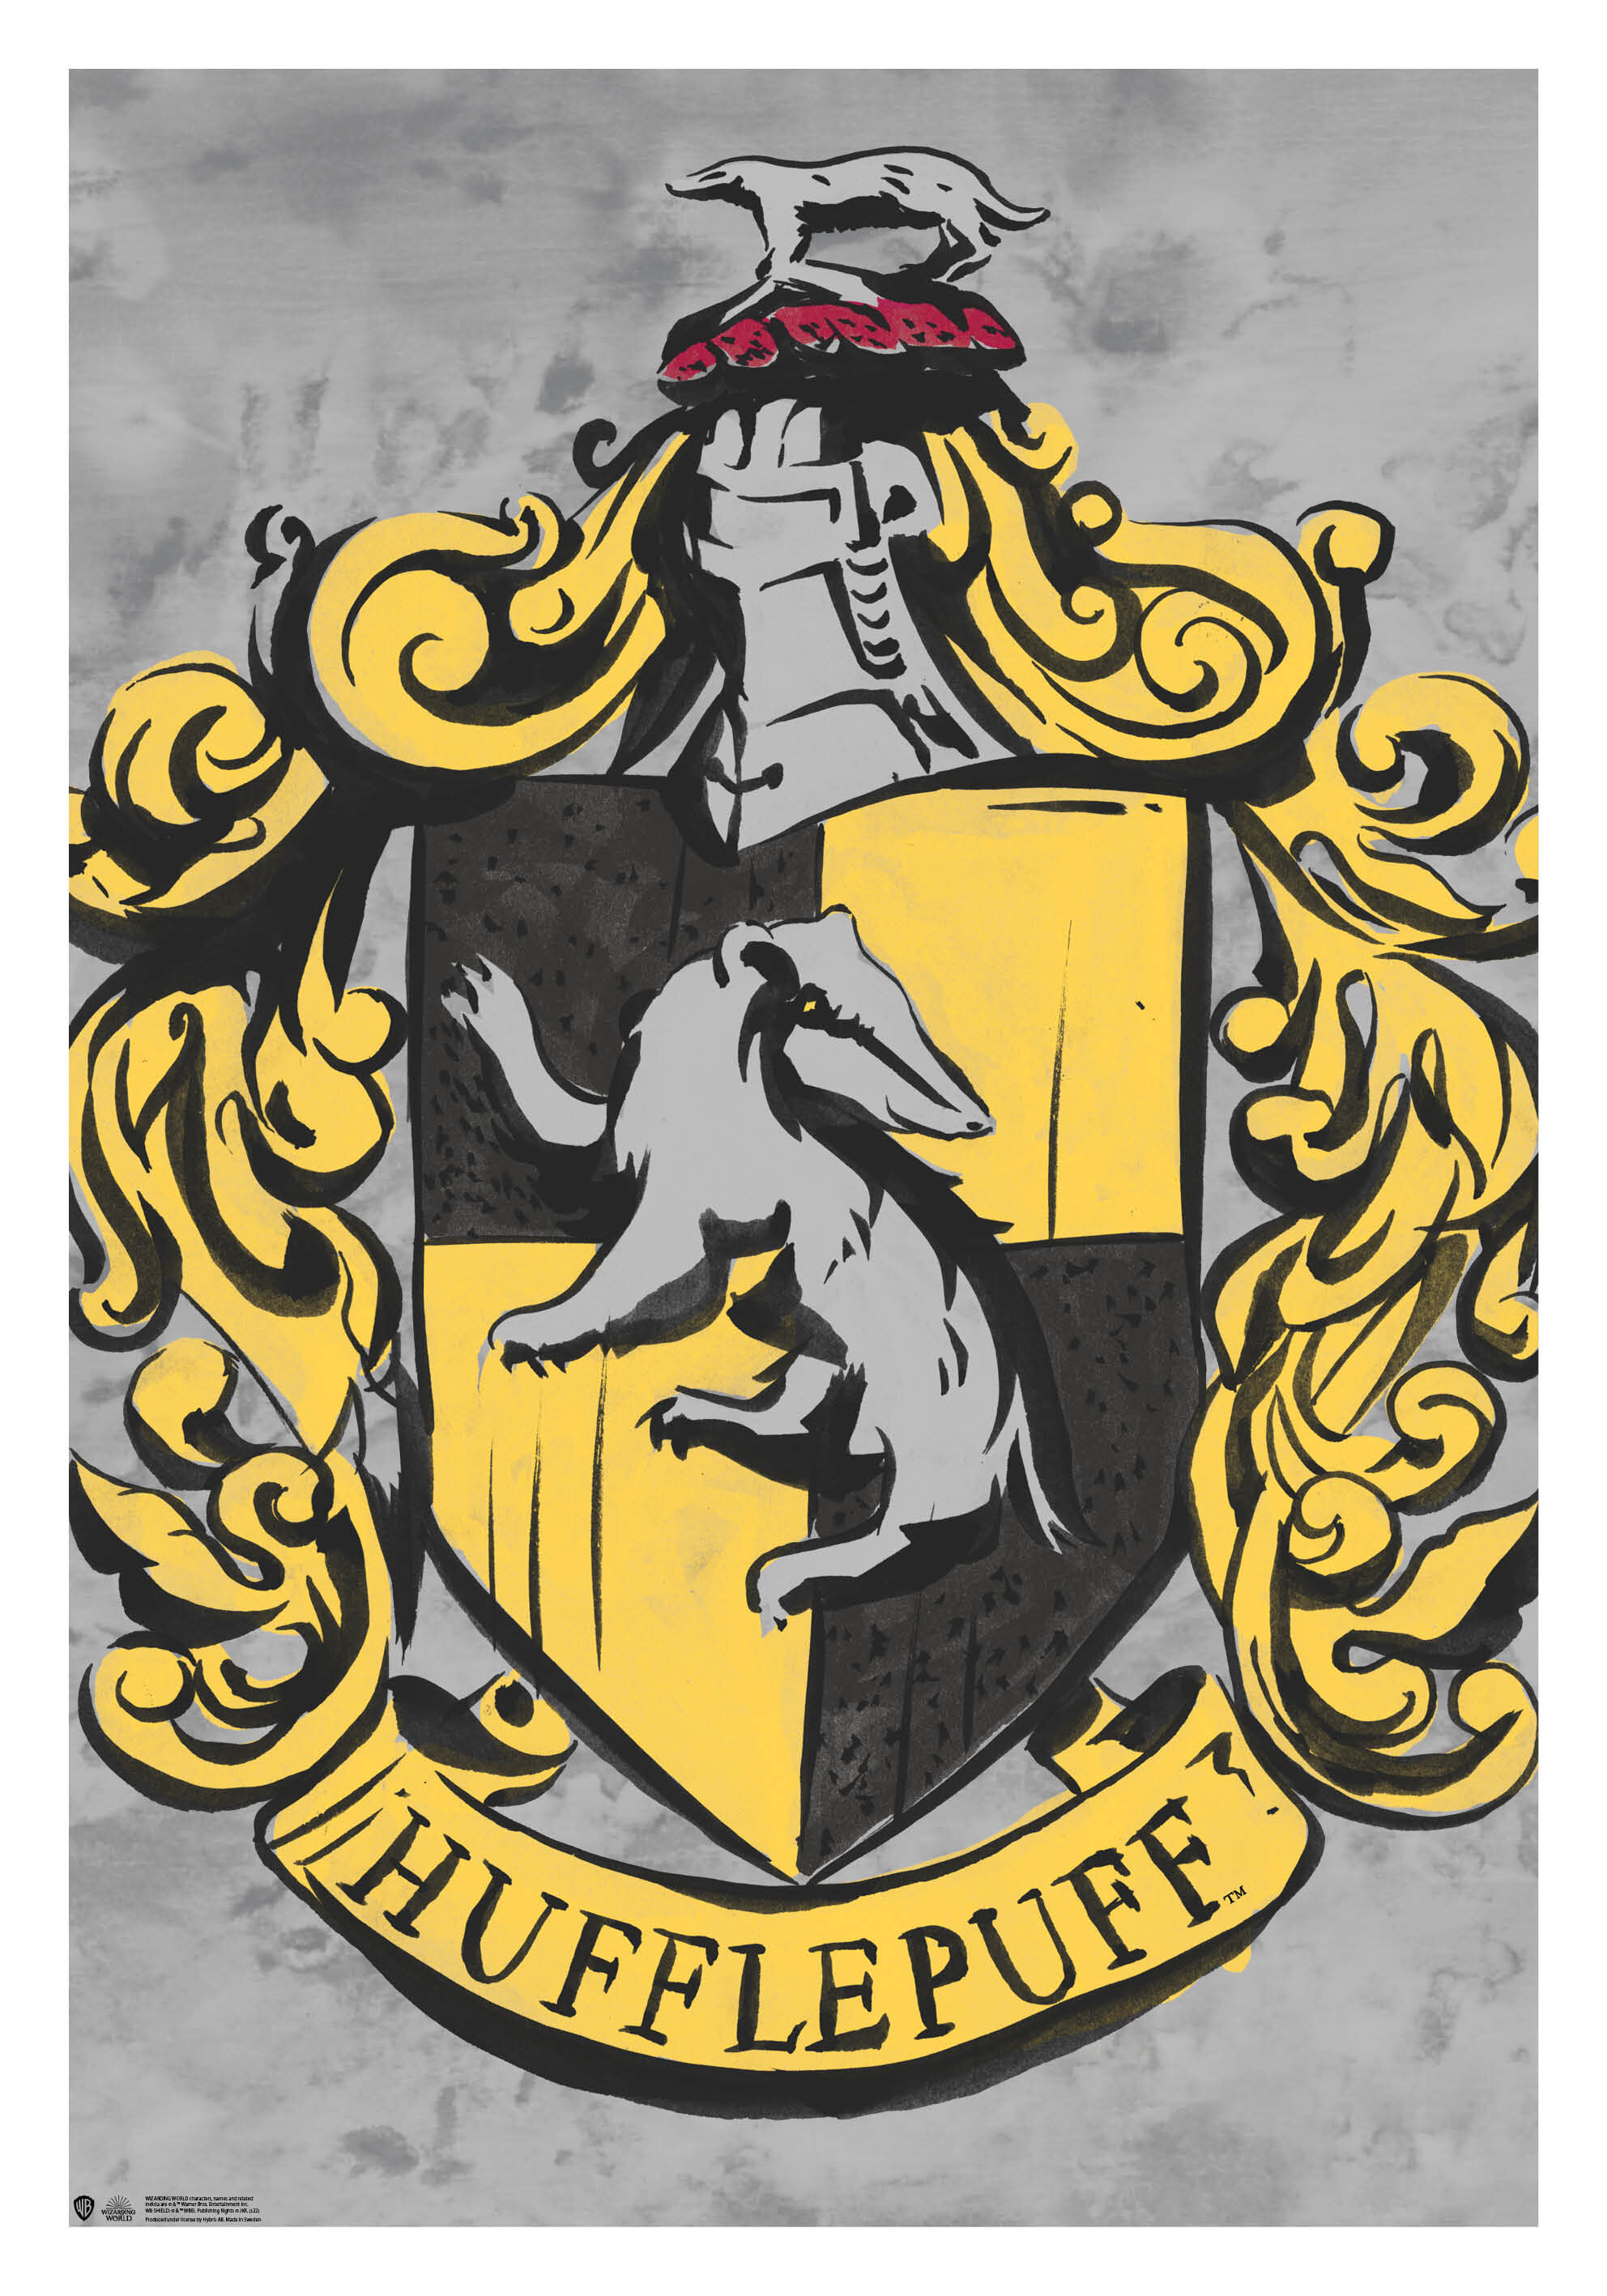 Proud Hufflepuff Harry Potter Vibrant Premium Glossy Poster A4 & A3 